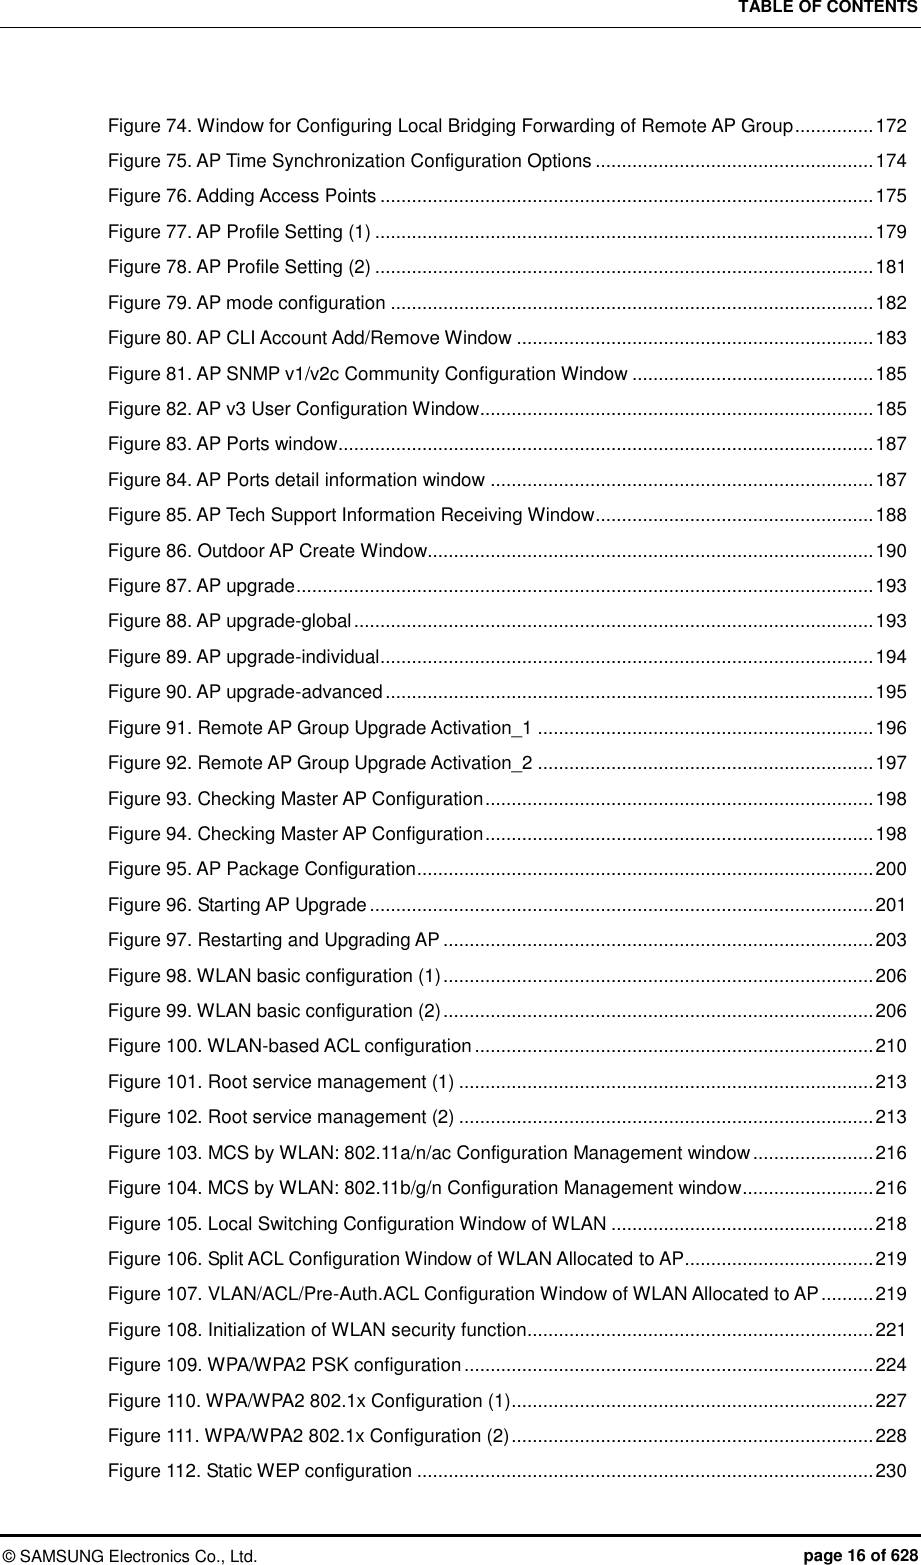 TABLE OF CONTENTS ©  SAMSUNG Electronics Co., Ltd.  page 16 of 628 Figure 74. Window for Configuring Local Bridging Forwarding of Remote AP Group ............... 172 Figure 75. AP Time Synchronization Configuration Options ..................................................... 174 Figure 76. Adding Access Points .............................................................................................. 175 Figure 77. AP Profile Setting (1) ............................................................................................... 179 Figure 78. AP Profile Setting (2) ............................................................................................... 181 Figure 79. AP mode configuration ............................................................................................ 182 Figure 80. AP CLI Account Add/Remove Window .................................................................... 183 Figure 81. AP SNMP v1/v2c Community Configuration Window .............................................. 185 Figure 82. AP v3 User Configuration Window ........................................................................... 185 Figure 83. AP Ports window ...................................................................................................... 187 Figure 84. AP Ports detail information window ......................................................................... 187 Figure 85. AP Tech Support Information Receiving Window ..................................................... 188 Figure 86. Outdoor AP Create Window..................................................................................... 190 Figure 87. AP upgrade .............................................................................................................. 193 Figure 88. AP upgrade-global ................................................................................................... 193 Figure 89. AP upgrade-individual .............................................................................................. 194 Figure 90. AP upgrade-advanced ............................................................................................. 195 Figure 91. Remote AP Group Upgrade Activation_1 ................................................................ 196 Figure 92. Remote AP Group Upgrade Activation_2 ................................................................ 197 Figure 93. Checking Master AP Configuration .......................................................................... 198 Figure 94. Checking Master AP Configuration .......................................................................... 198 Figure 95. AP Package Configuration ....................................................................................... 200 Figure 96. Starting AP Upgrade ................................................................................................ 201 Figure 97. Restarting and Upgrading AP .................................................................................. 203 Figure 98. WLAN basic configuration (1) .................................................................................. 206 Figure 99. WLAN basic configuration (2) .................................................................................. 206 Figure 100. WLAN-based ACL configuration ............................................................................ 210 Figure 101. Root service management (1) ............................................................................... 213 Figure 102. Root service management (2) ............................................................................... 213 Figure 103. MCS by WLAN: 802.11a/n/ac Configuration Management window ....................... 216 Figure 104. MCS by WLAN: 802.11b/g/n Configuration Management window ......................... 216 Figure 105. Local Switching Configuration Window of WLAN .................................................. 218 Figure 106. Split ACL Configuration Window of WLAN Allocated to AP .................................... 219 Figure 107. VLAN/ACL/Pre-Auth.ACL Configuration Window of WLAN Allocated to AP .......... 219 Figure 108. Initialization of WLAN security function .................................................................. 221 Figure 109. WPA/WPA2 PSK configuration .............................................................................. 224 Figure 110. WPA/WPA2 802.1x Configuration (1) ..................................................................... 227 Figure 111. WPA/WPA2 802.1x Configuration (2) ..................................................................... 228 Figure 112. Static WEP configuration ....................................................................................... 230 